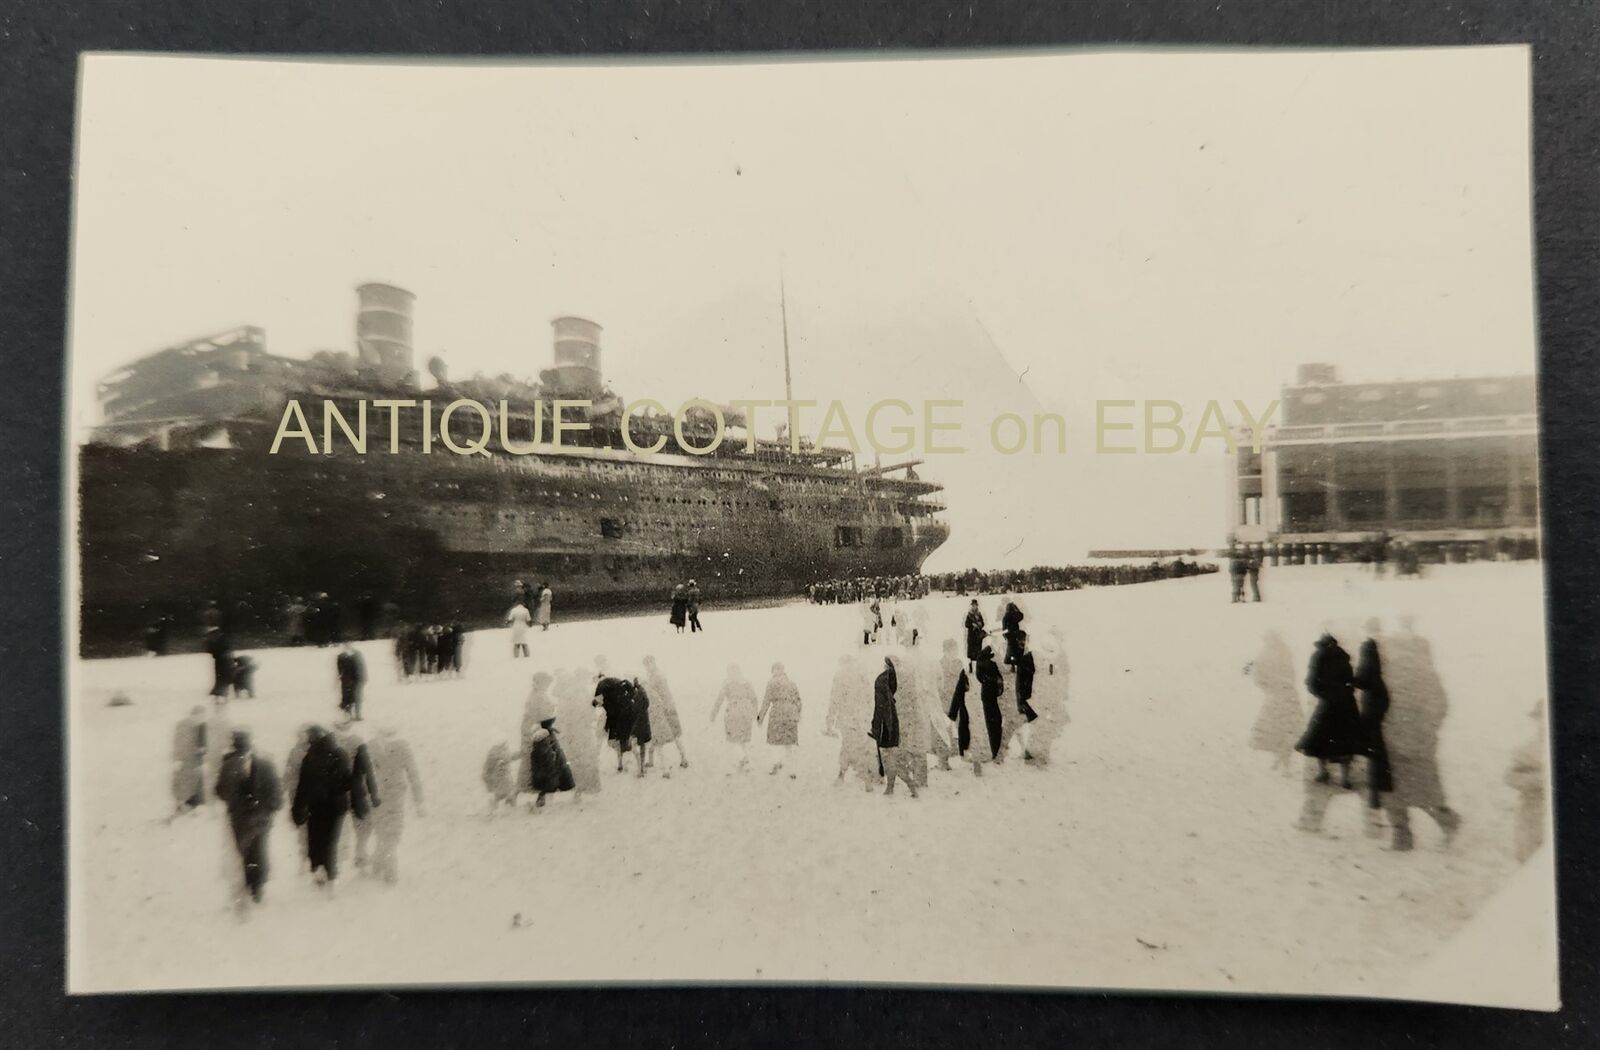 antique TRICK PHOTOGRAPH double exposure PEOPLE GHOSTS walking on beach SMALL